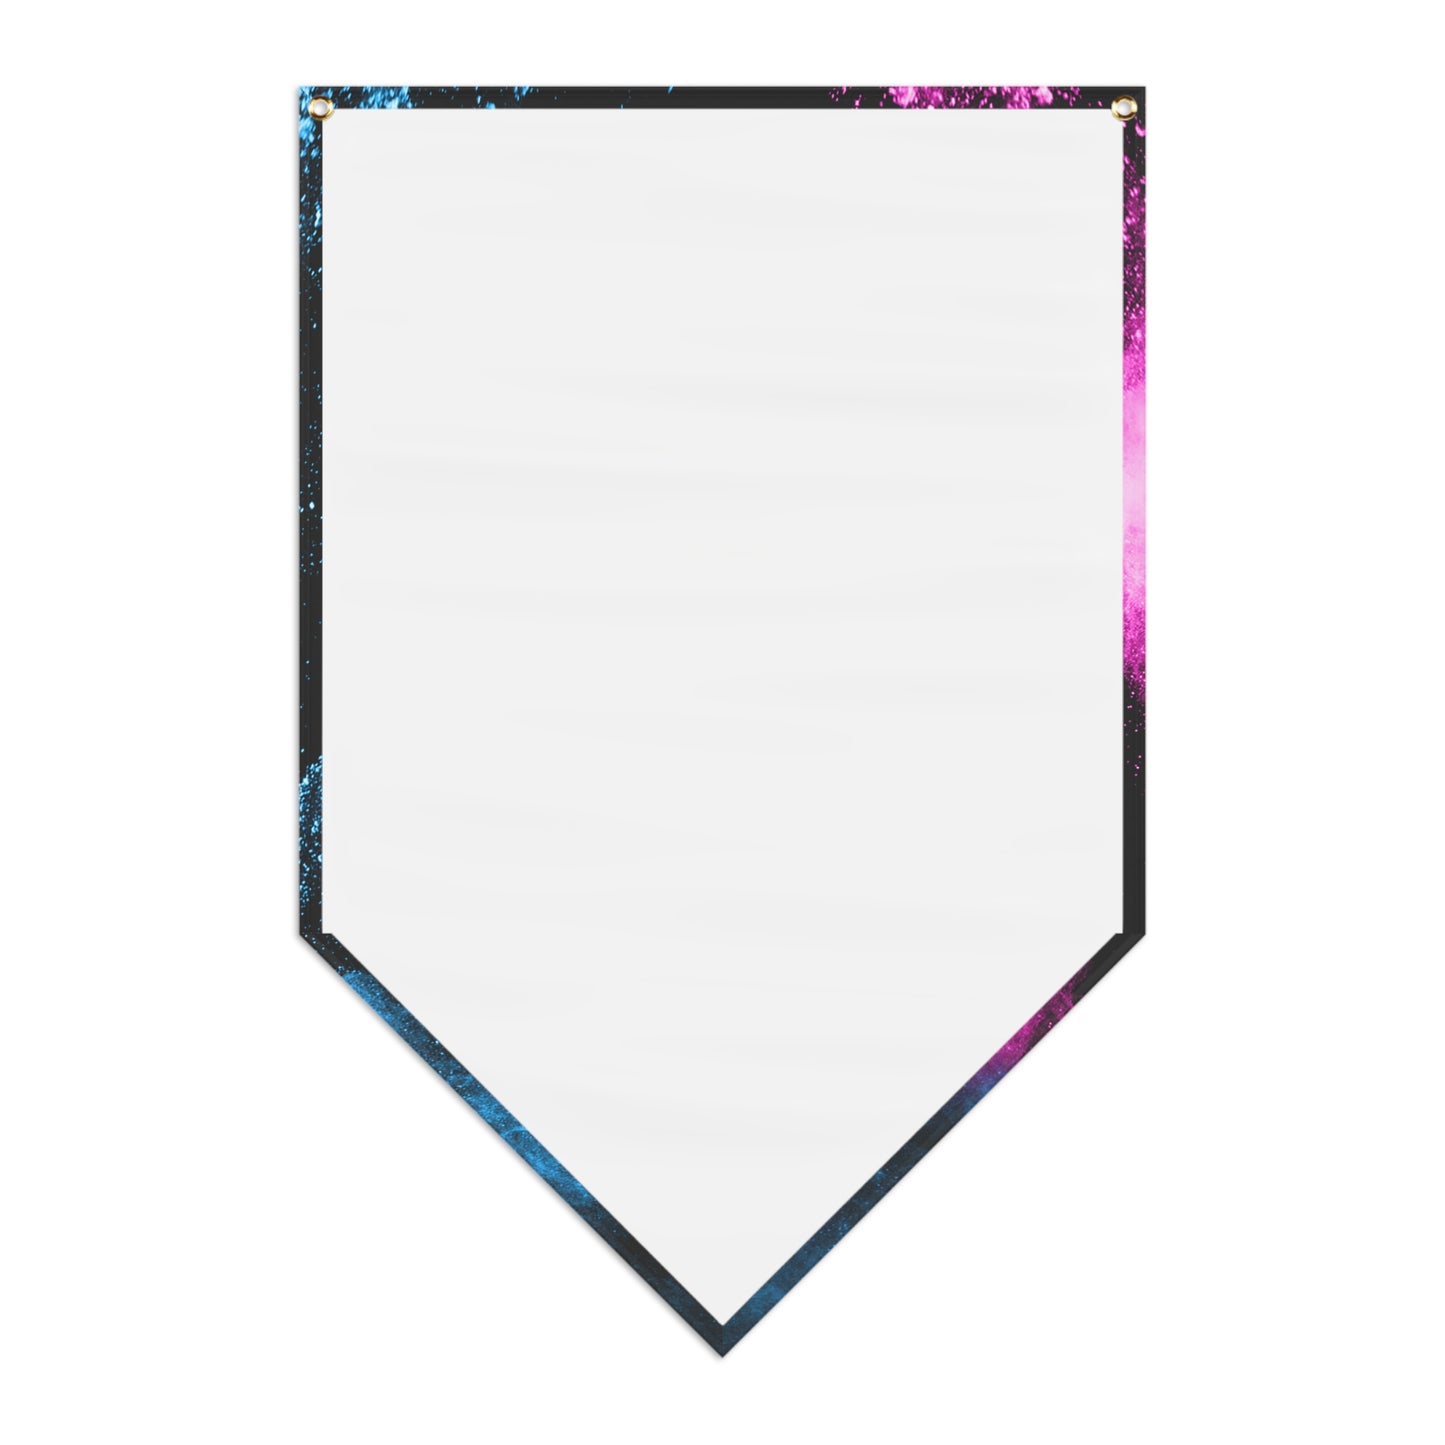 TEAM LAYLA CPE Pennant Banner